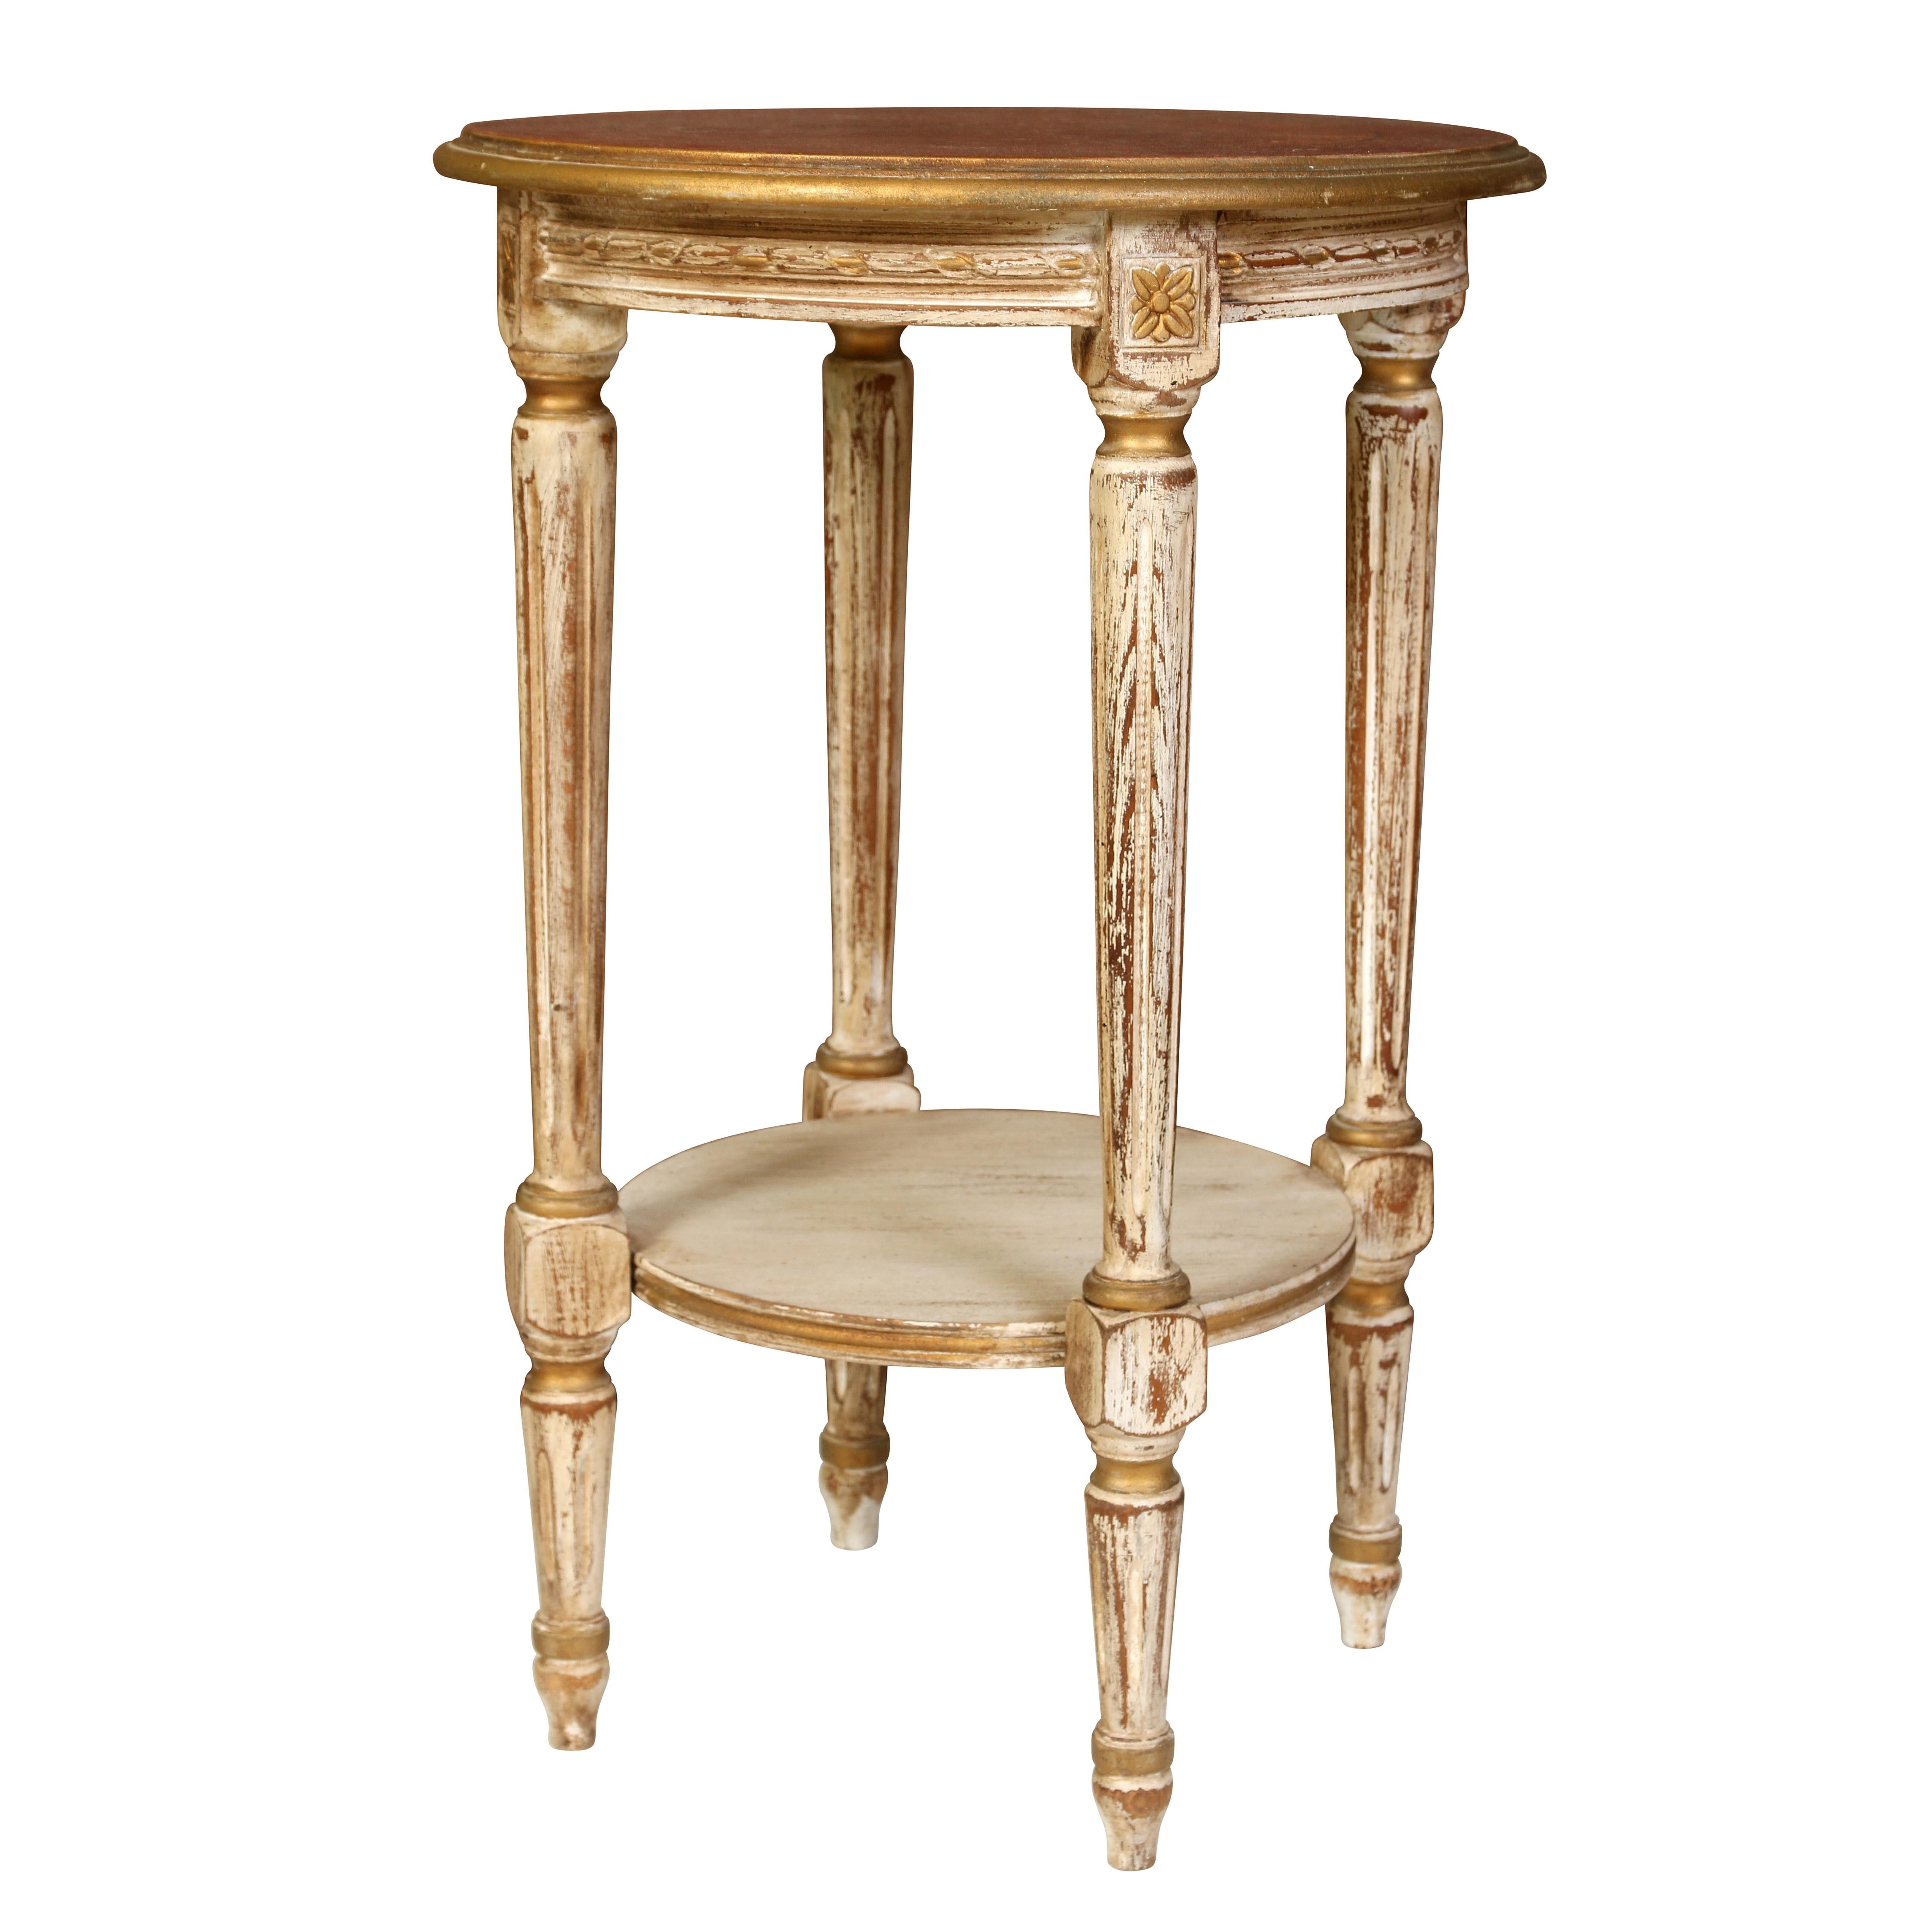 Every living room or family room needs a drinks table (if not several!)  This little one is oozing with character. The round top is stained wood accented with gold leaf around the rim.  The base is painted in a washed white with gold accents. 